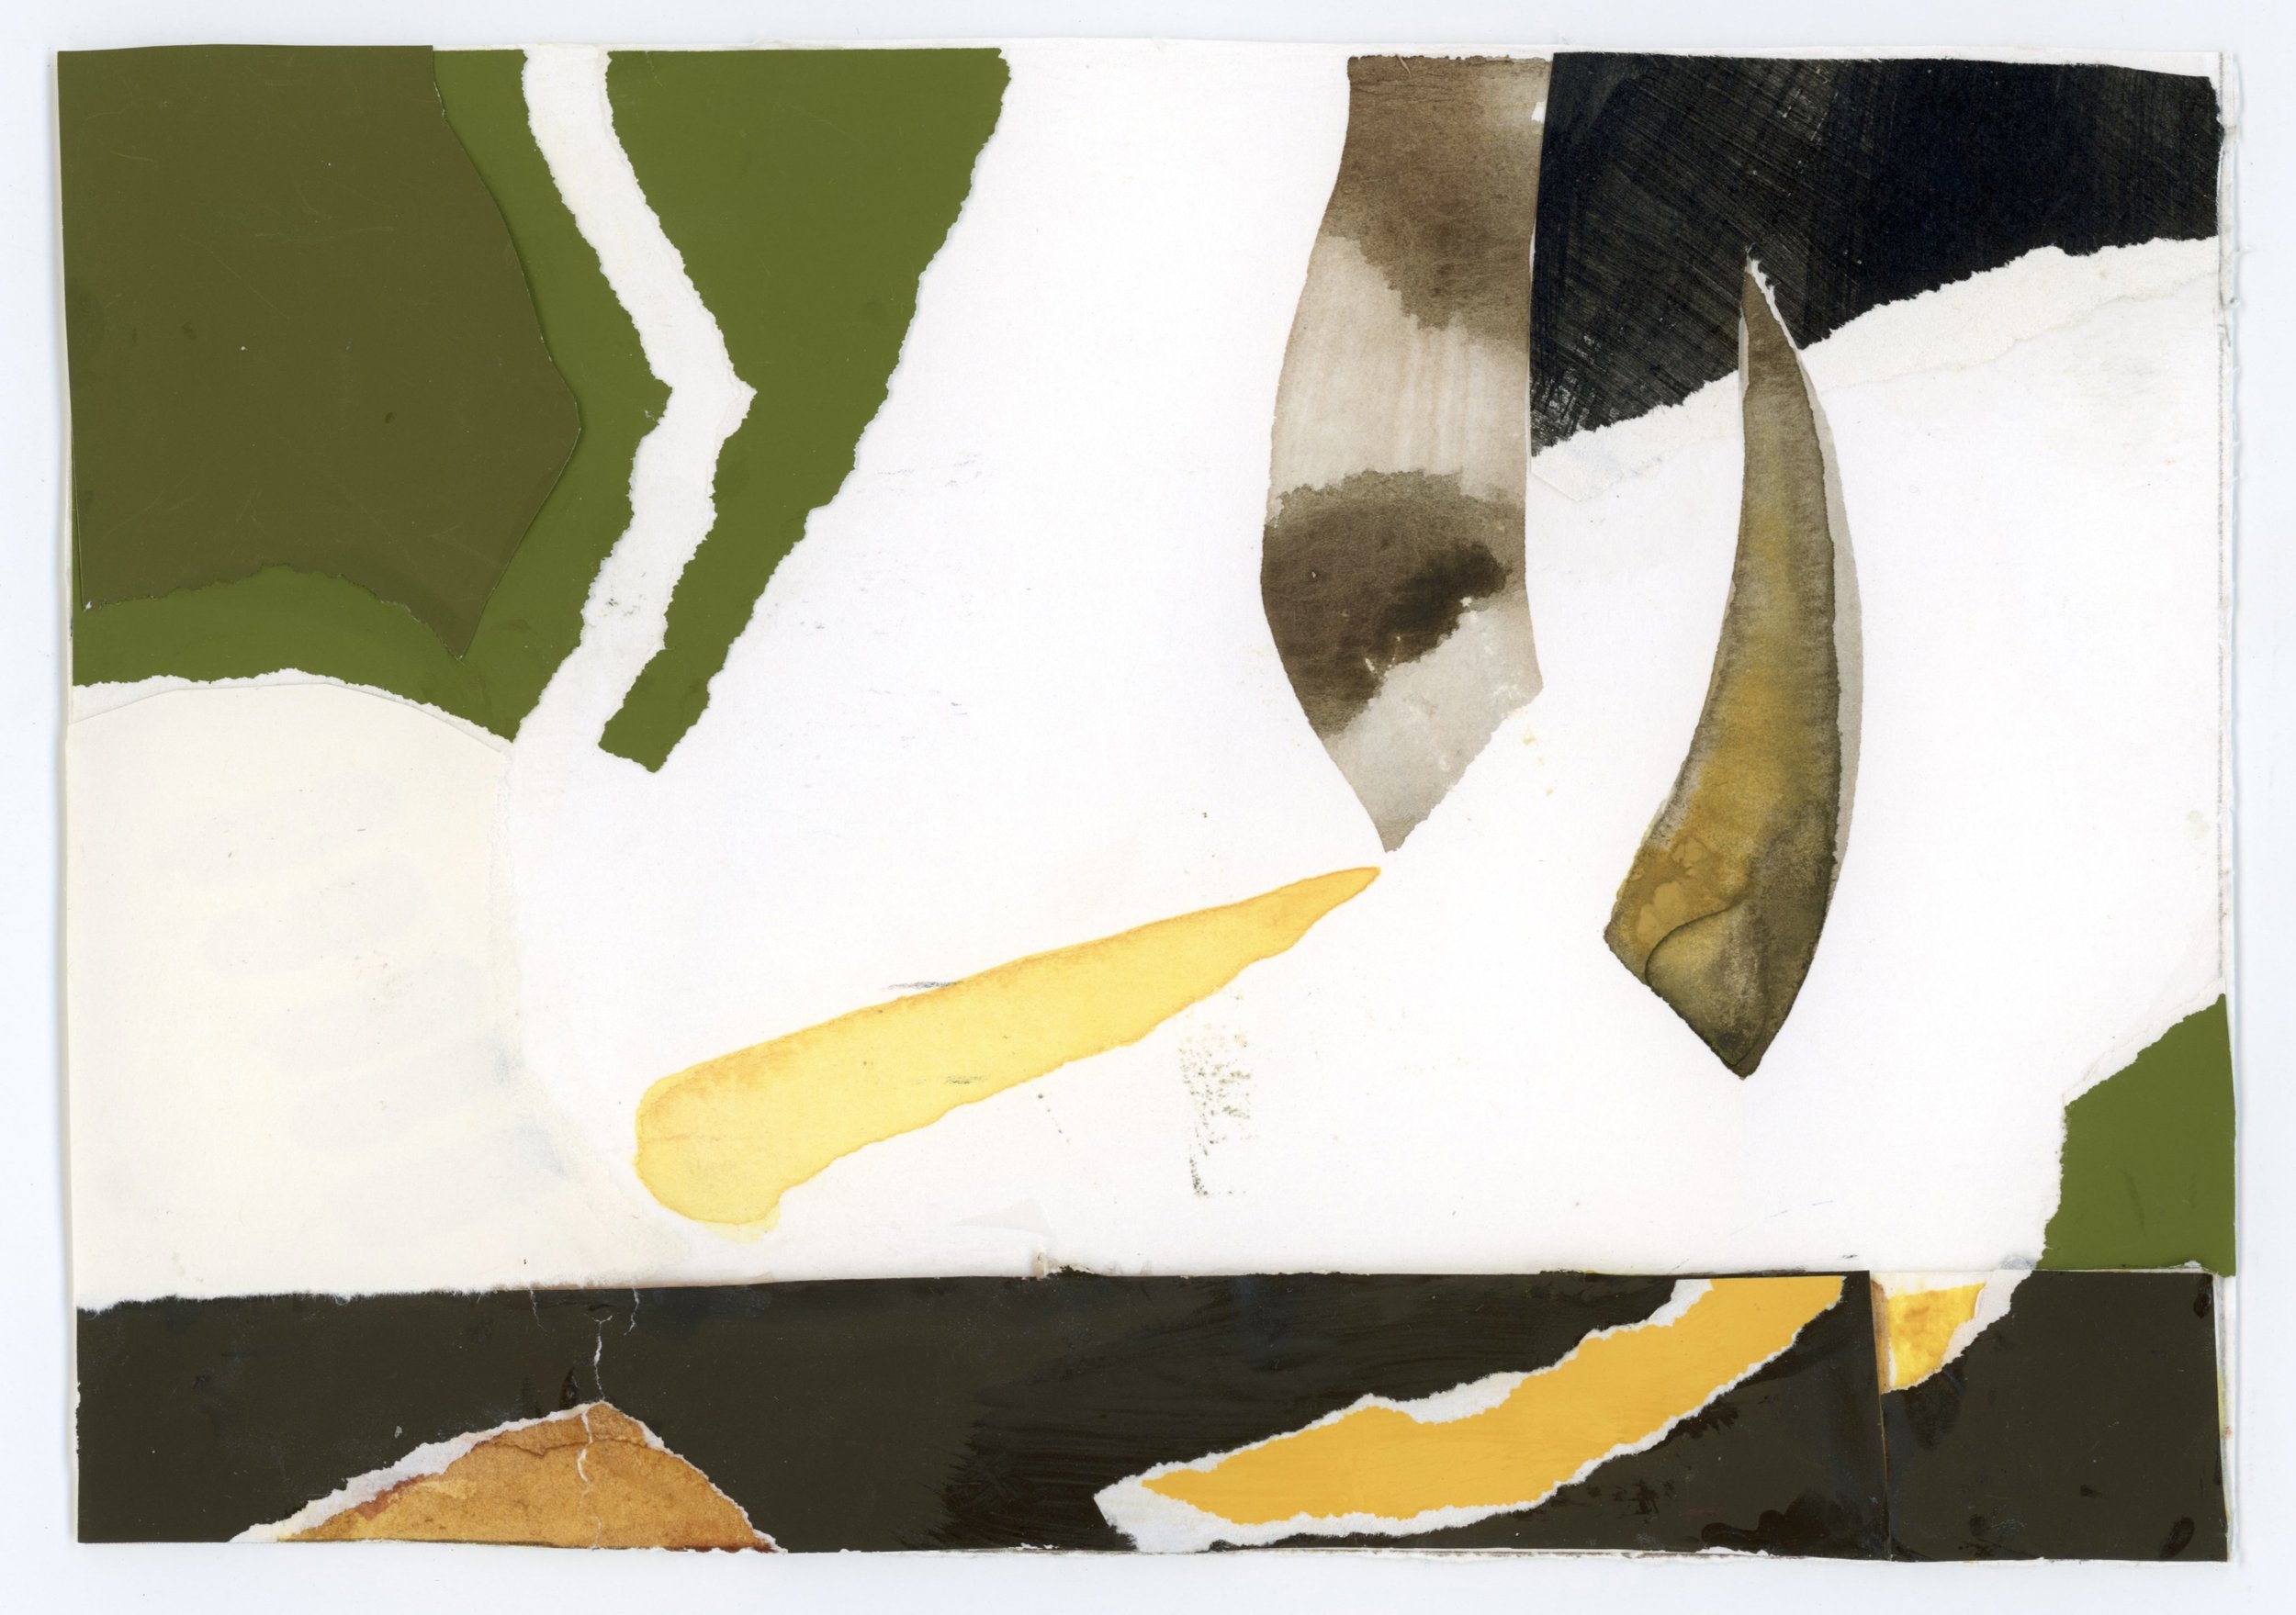   I Sowed These Seeds,  2022 Watercolor collage on paper 5 1⁄4 x 7 1⁄2 in. 